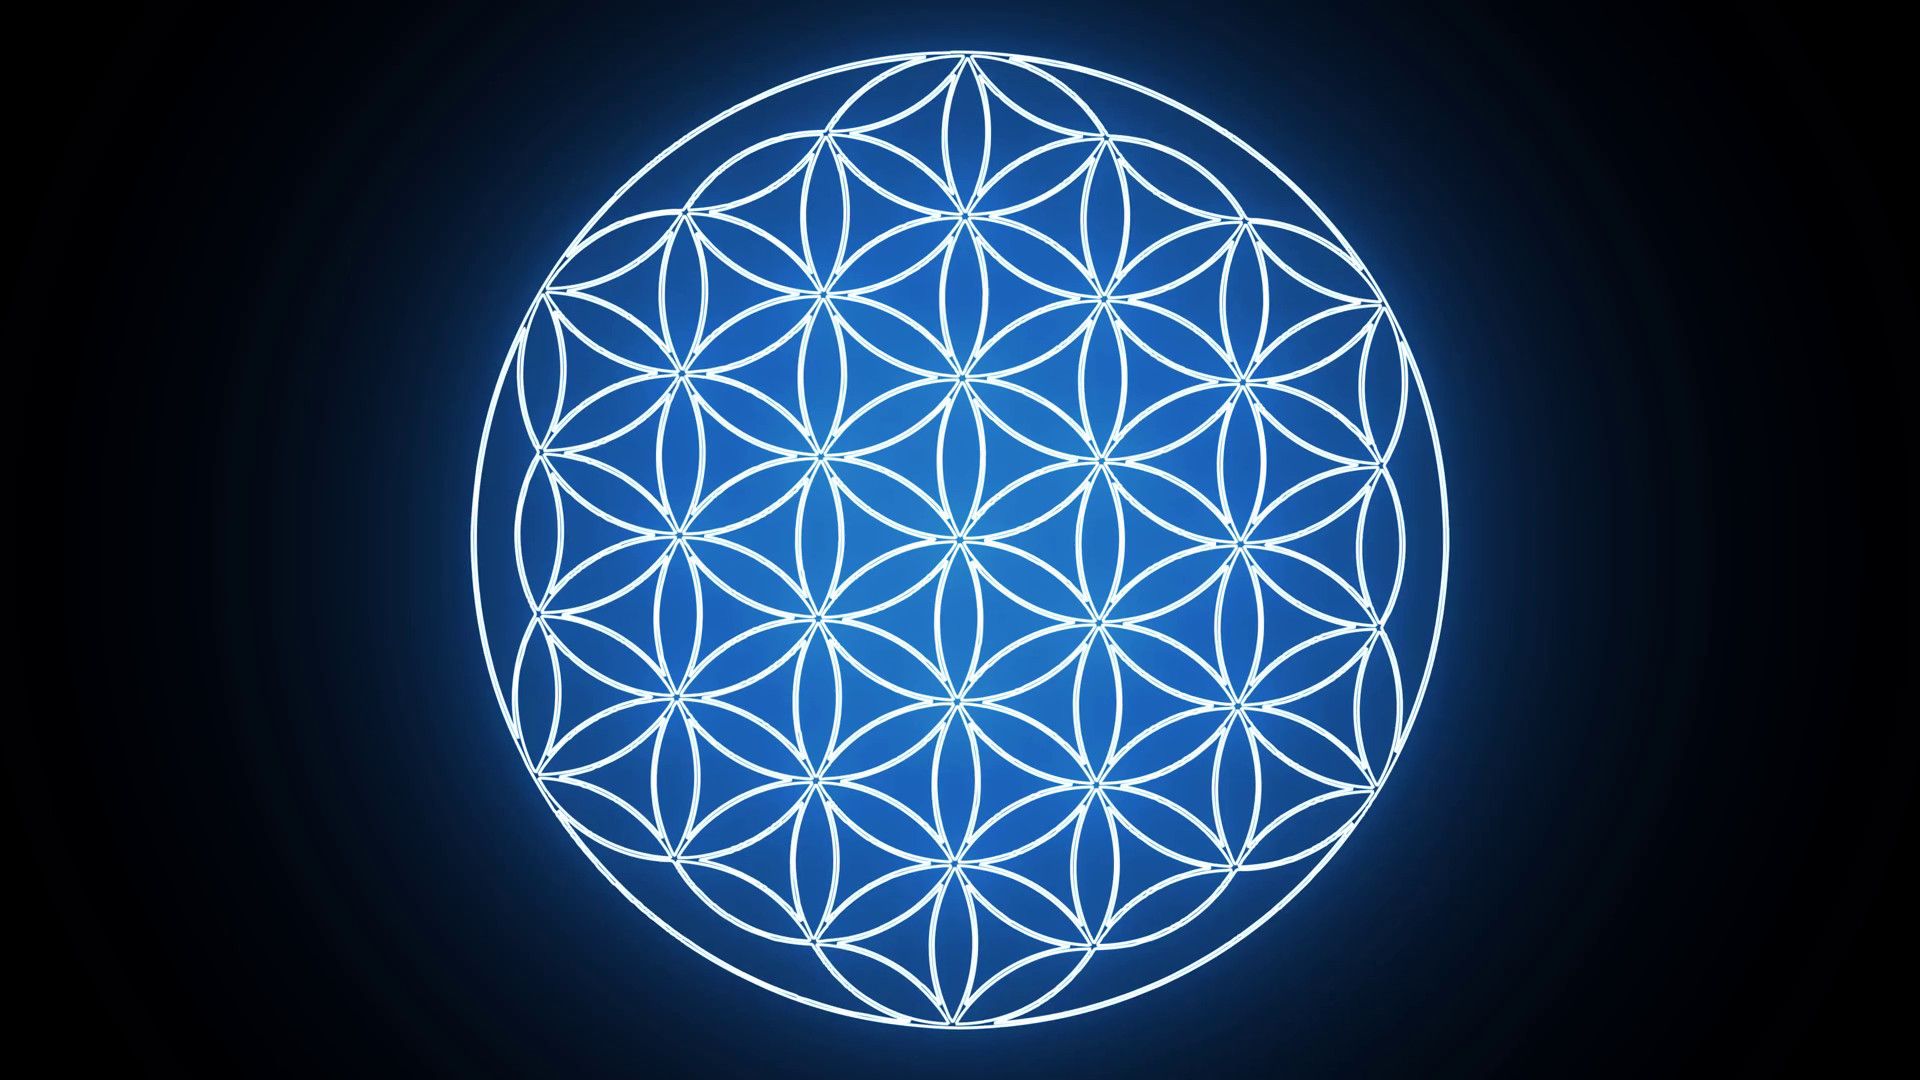 Flower Of Life Wallpapers On Wallpaperdog It could be for meditation, peace within your home, creativity, positive energy. flower of life wallpapers on wallpaperdog